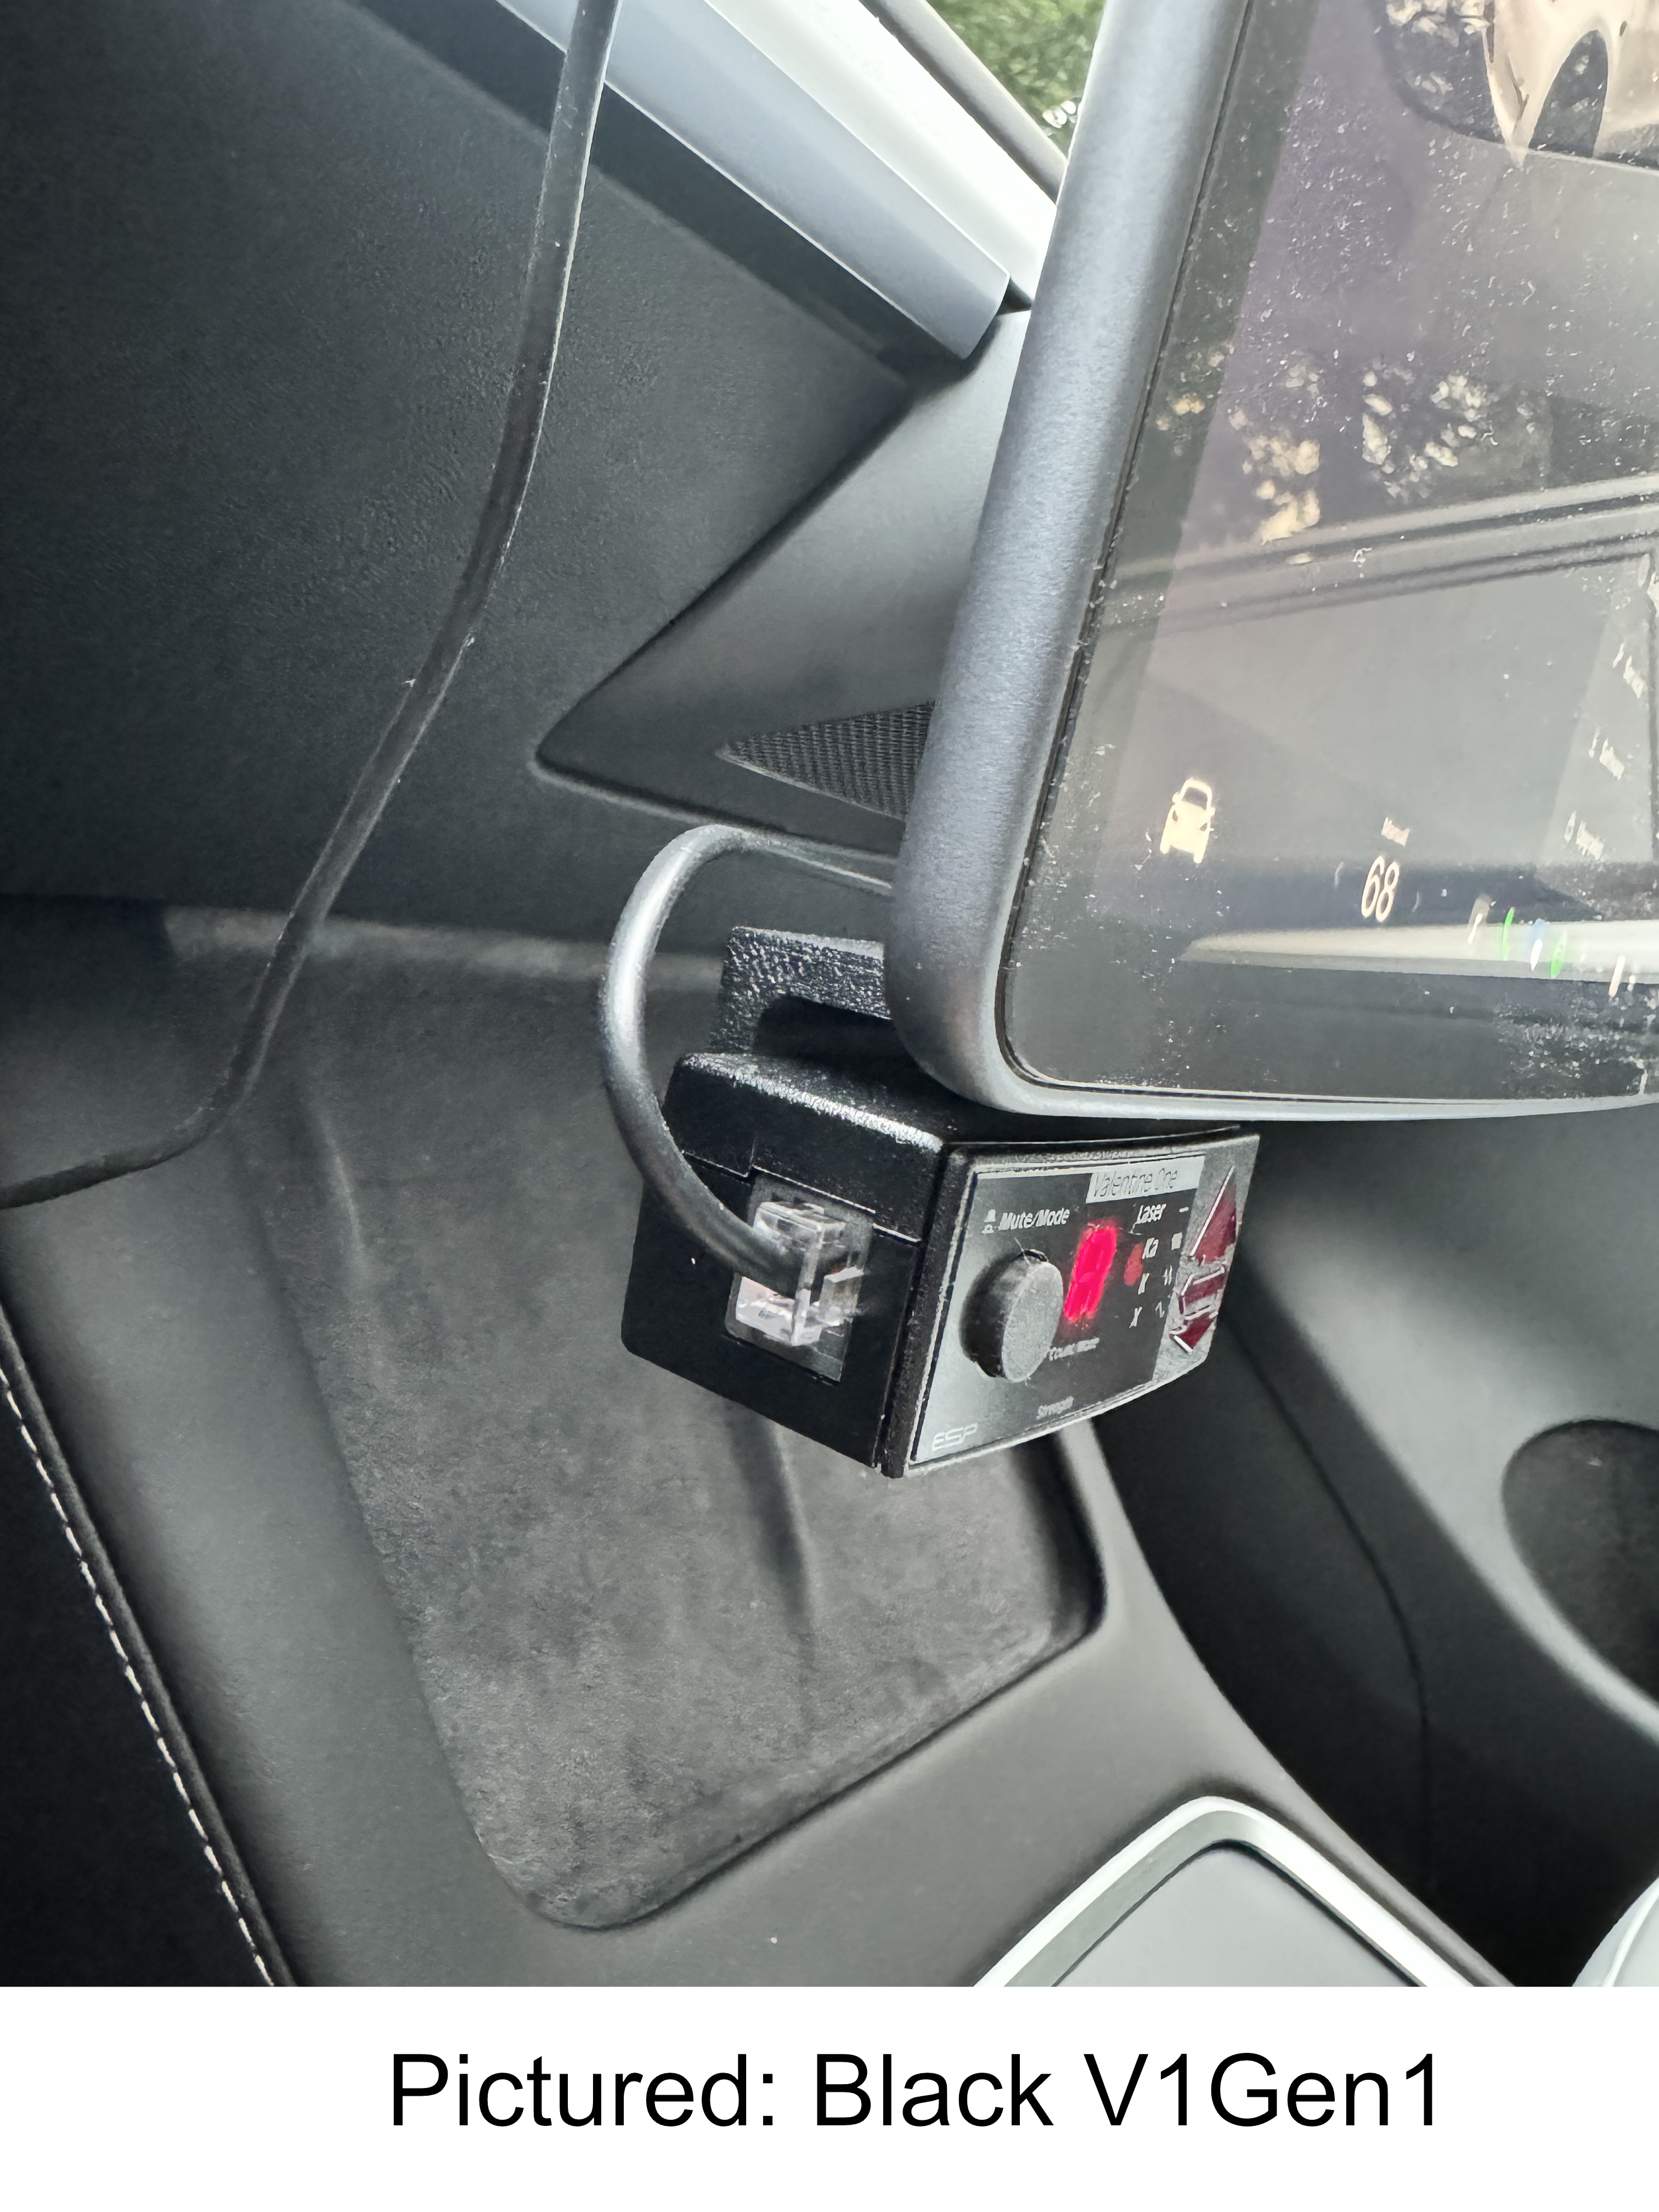 Side view of the display unit mounted on the bottom screen of a Tesla